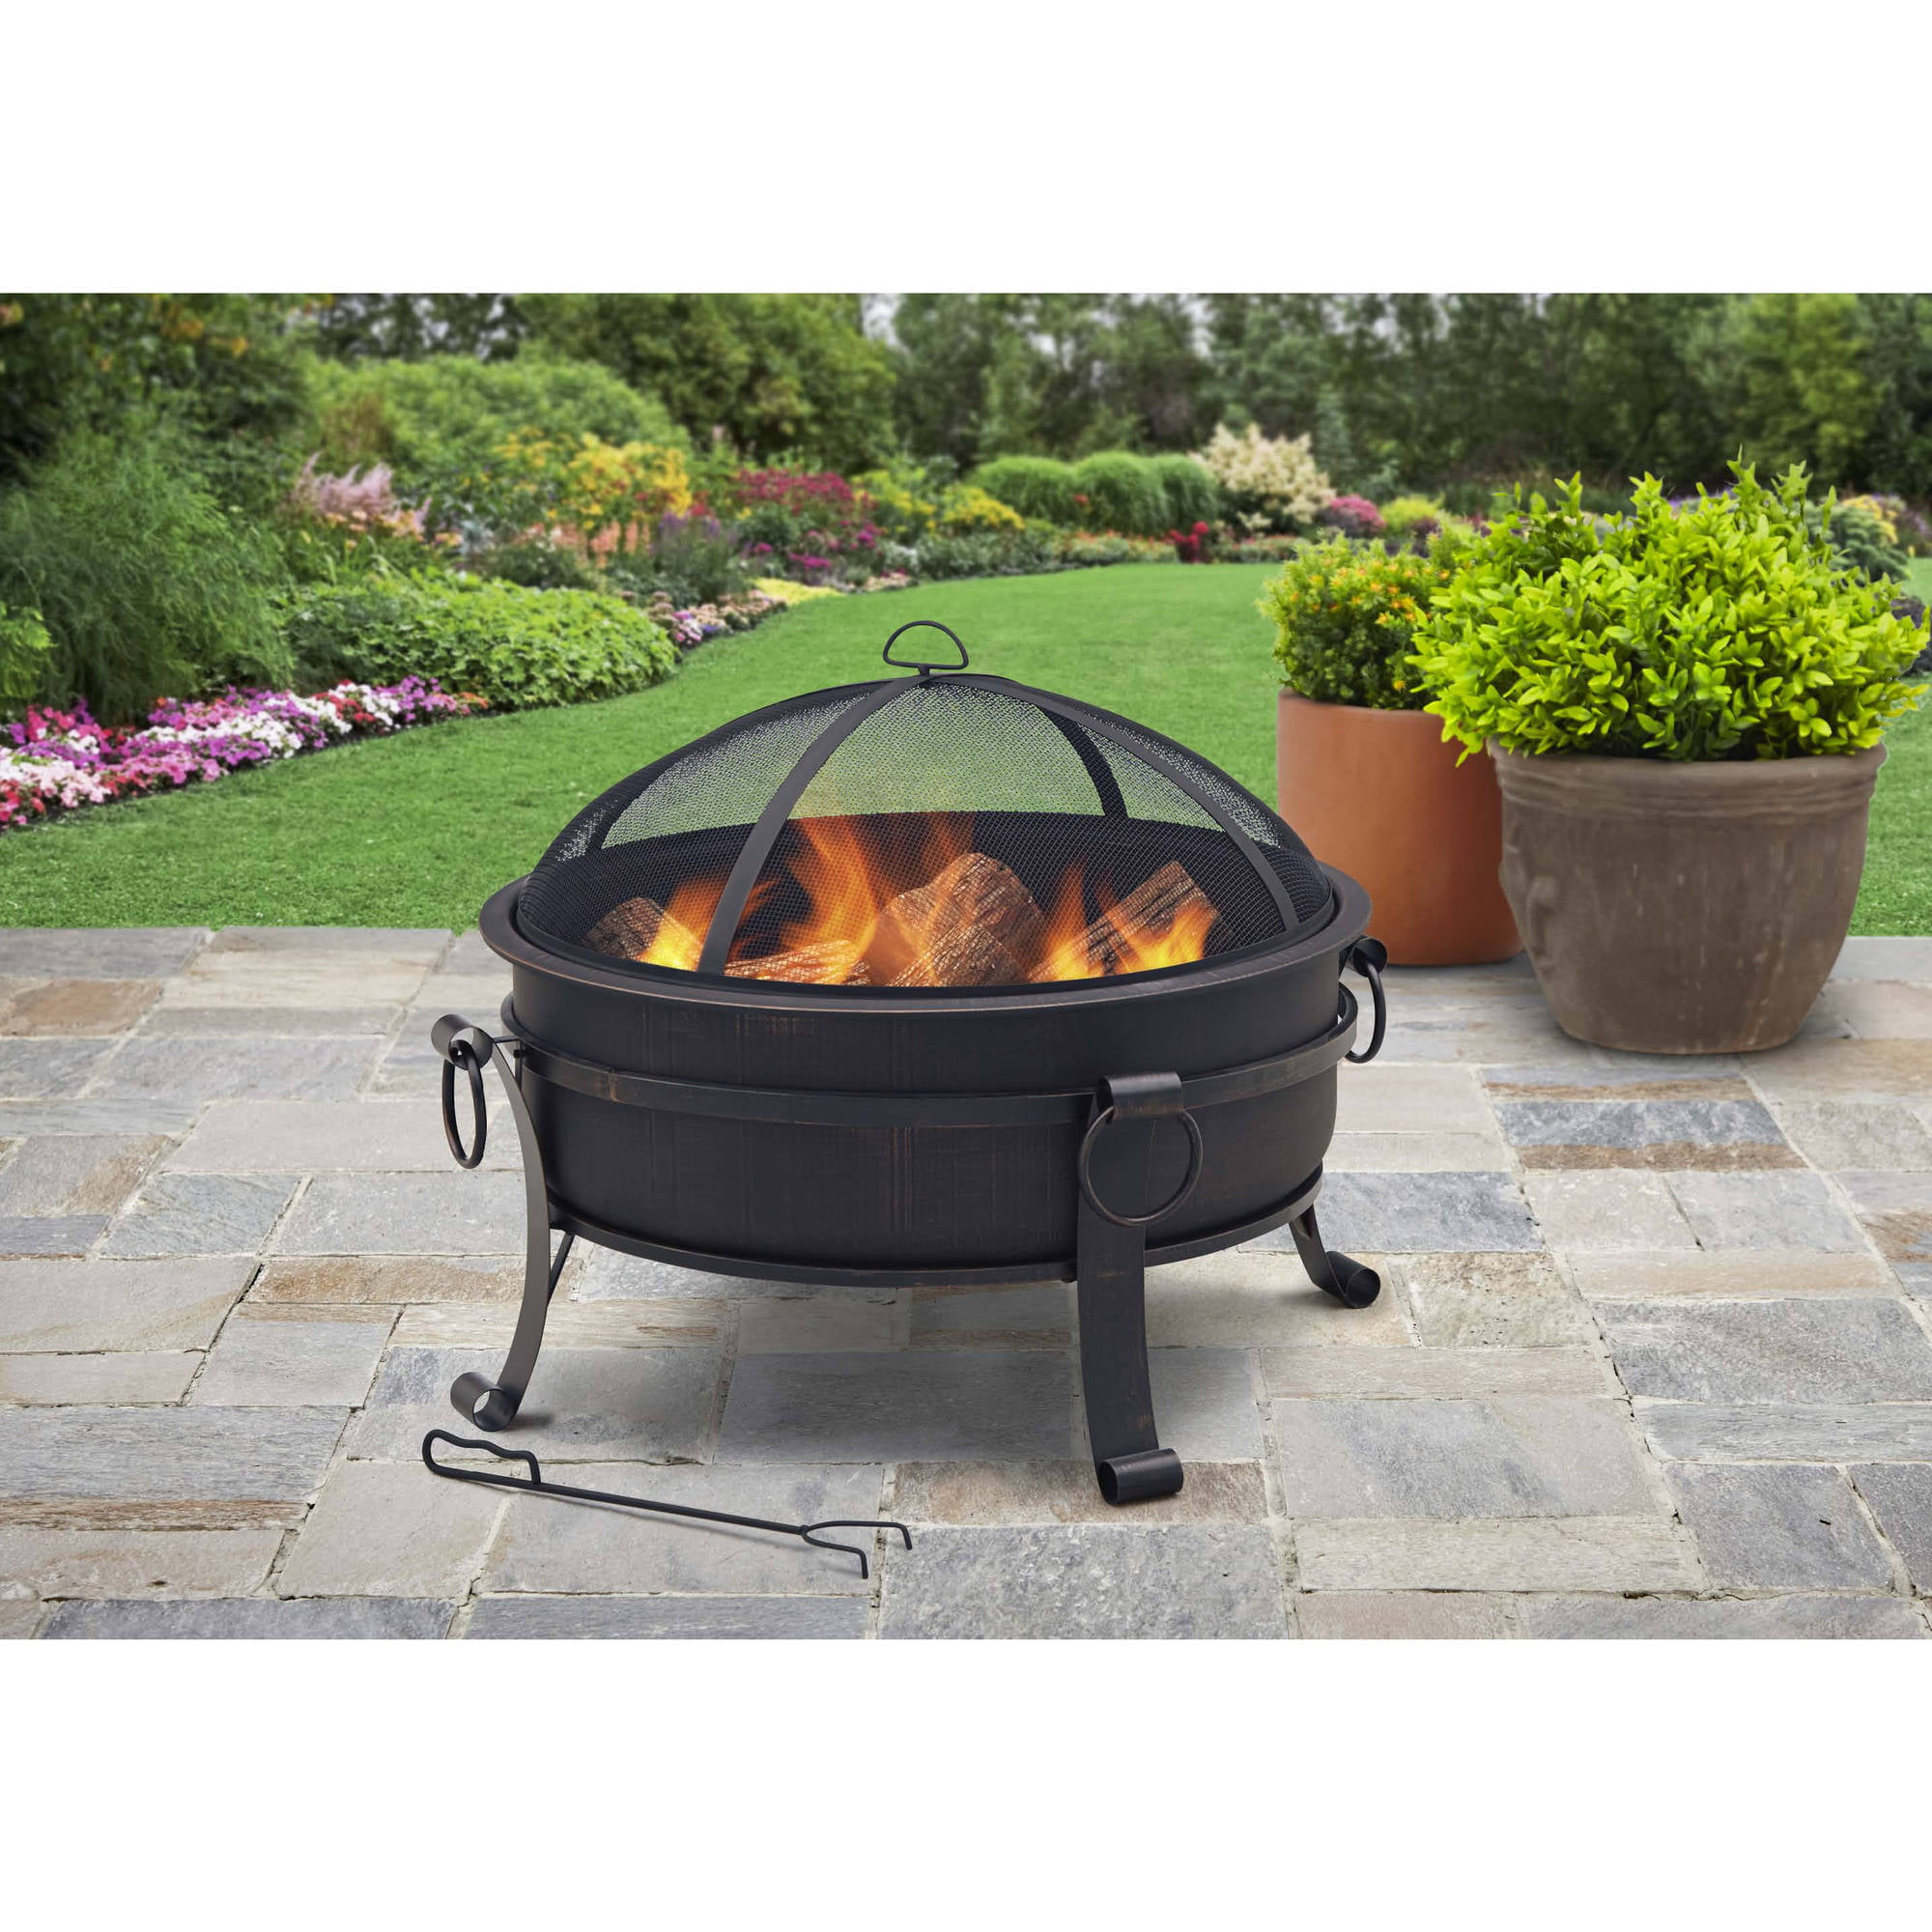 Better Homes Gardens 30 in. Cauldron Deep Steel Fire Bowl Pit W/Pull ...